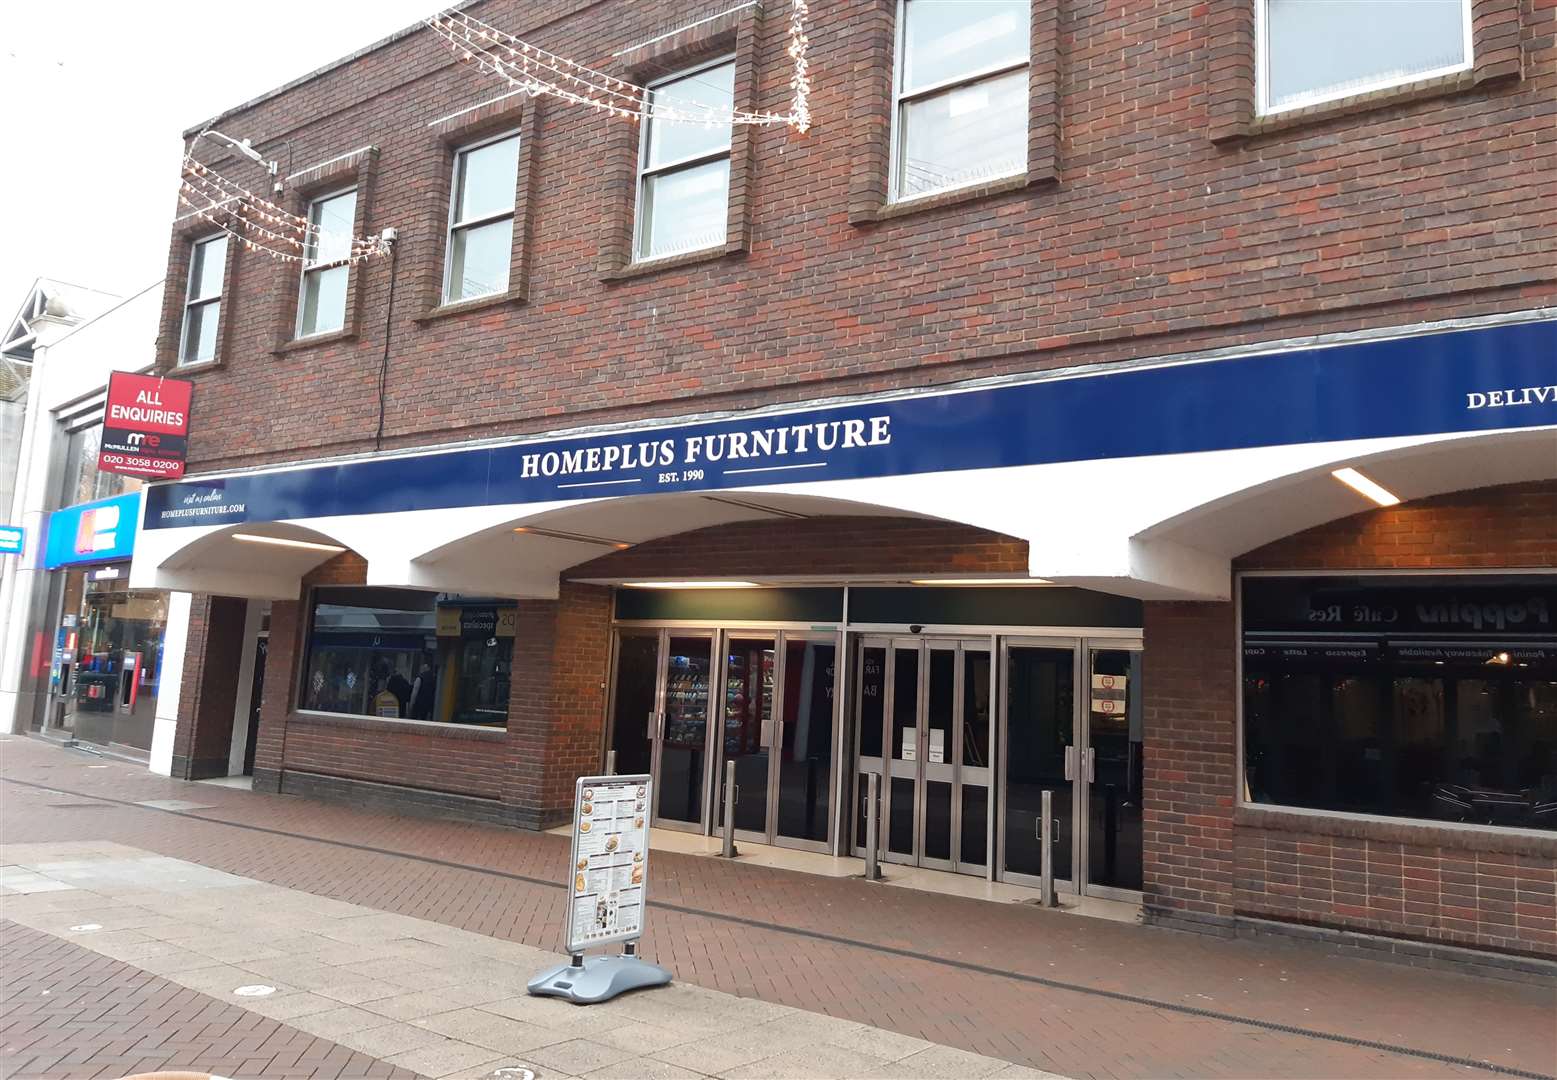 The former M&S unit has been empty since May 2019